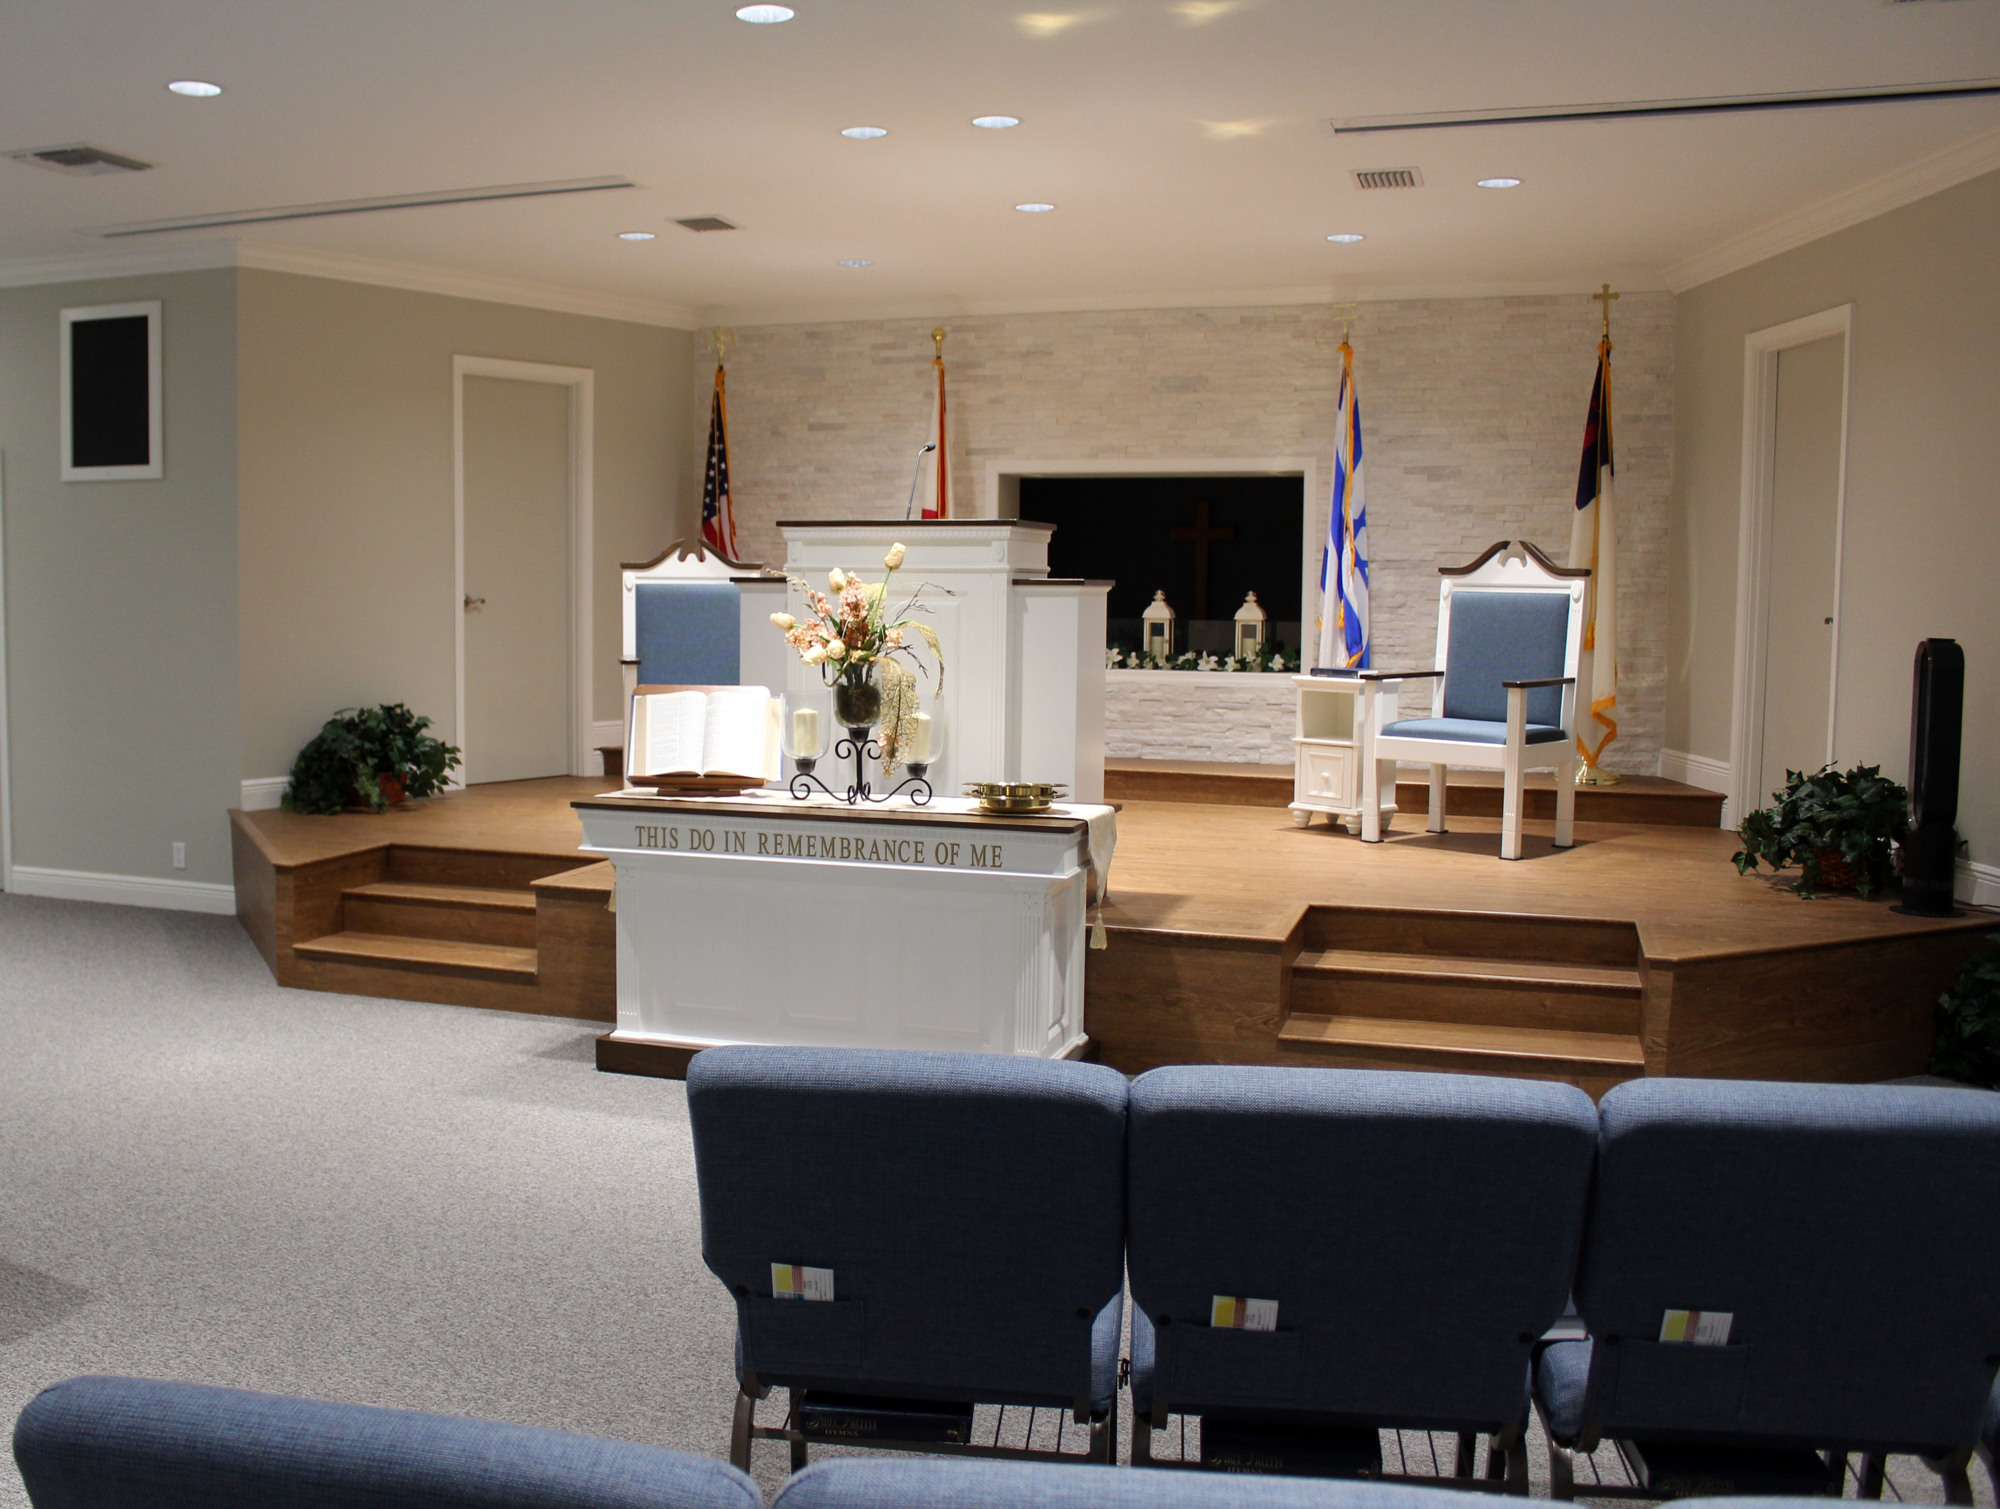 The new campus will feature a chapel, which the current campus does not have.